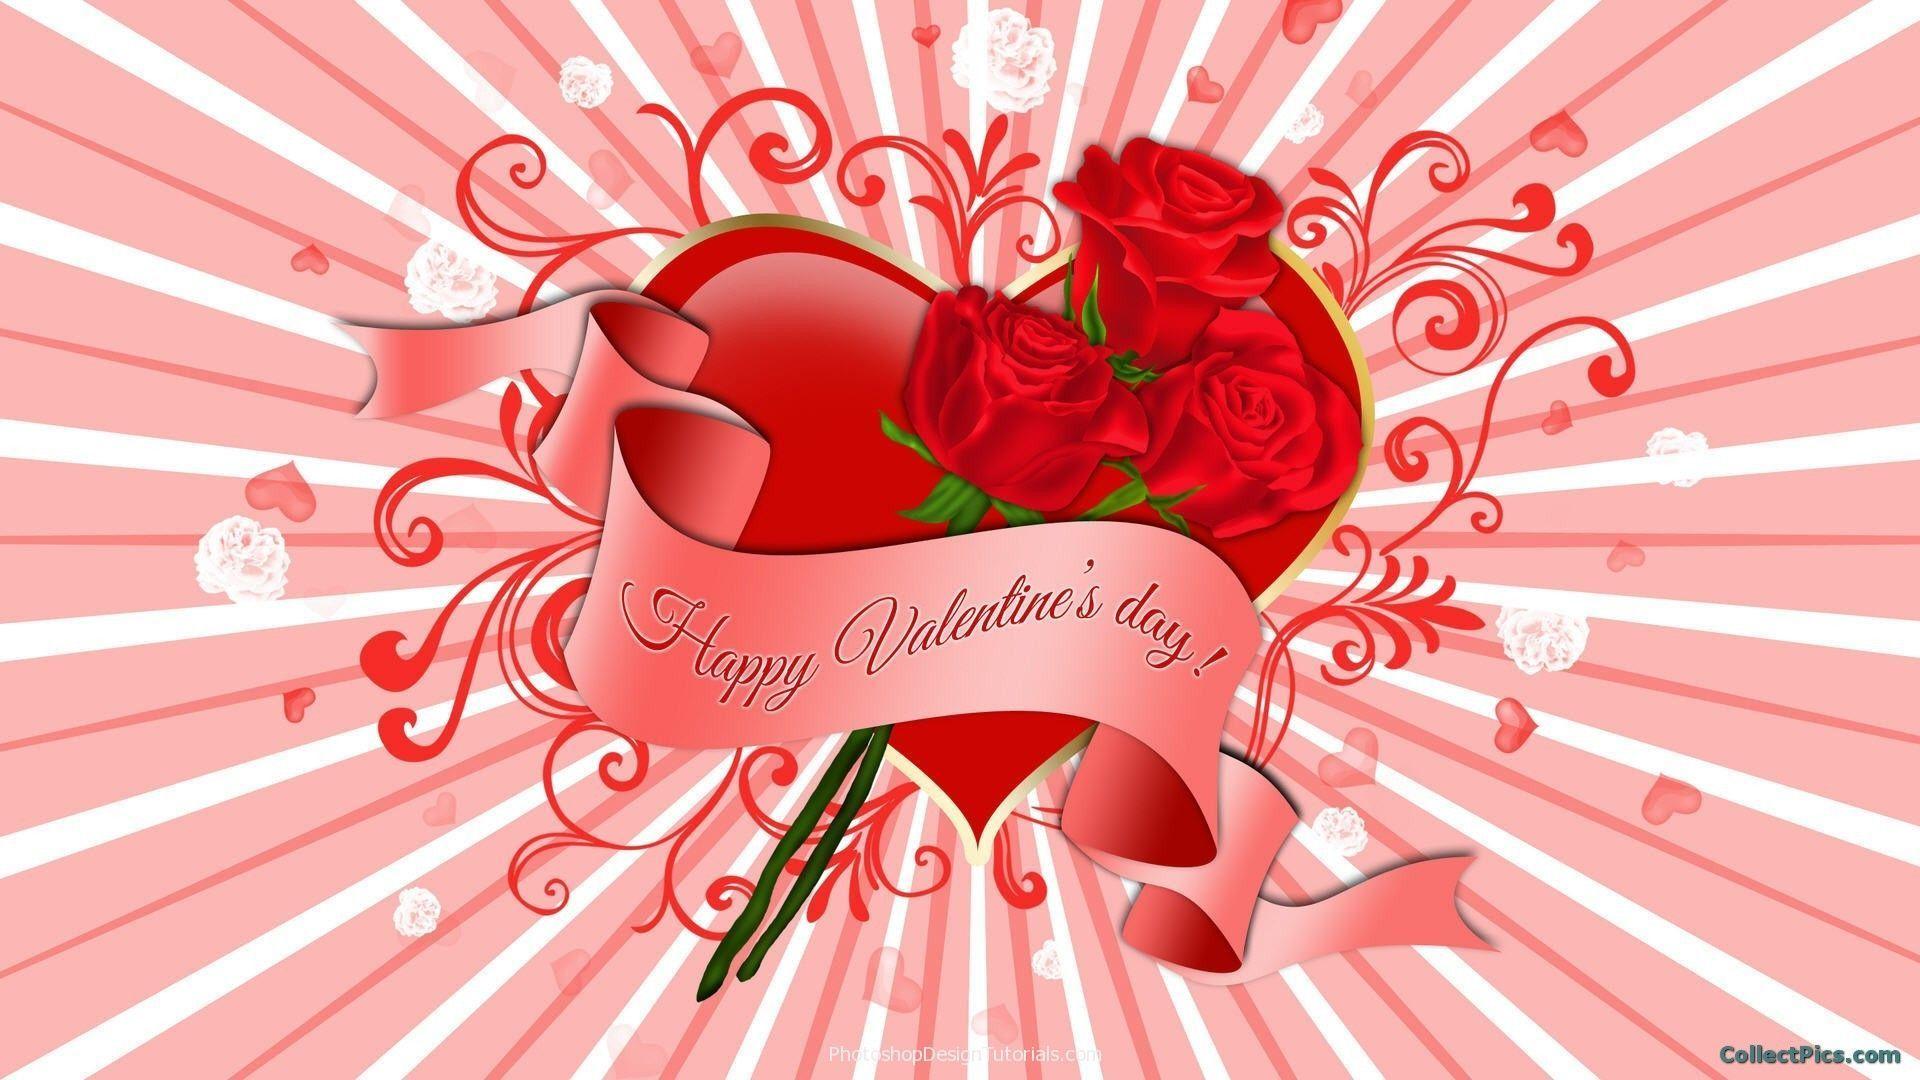 Cool Dekstop Happy Valentines Day Holiday Wall Wallpaper